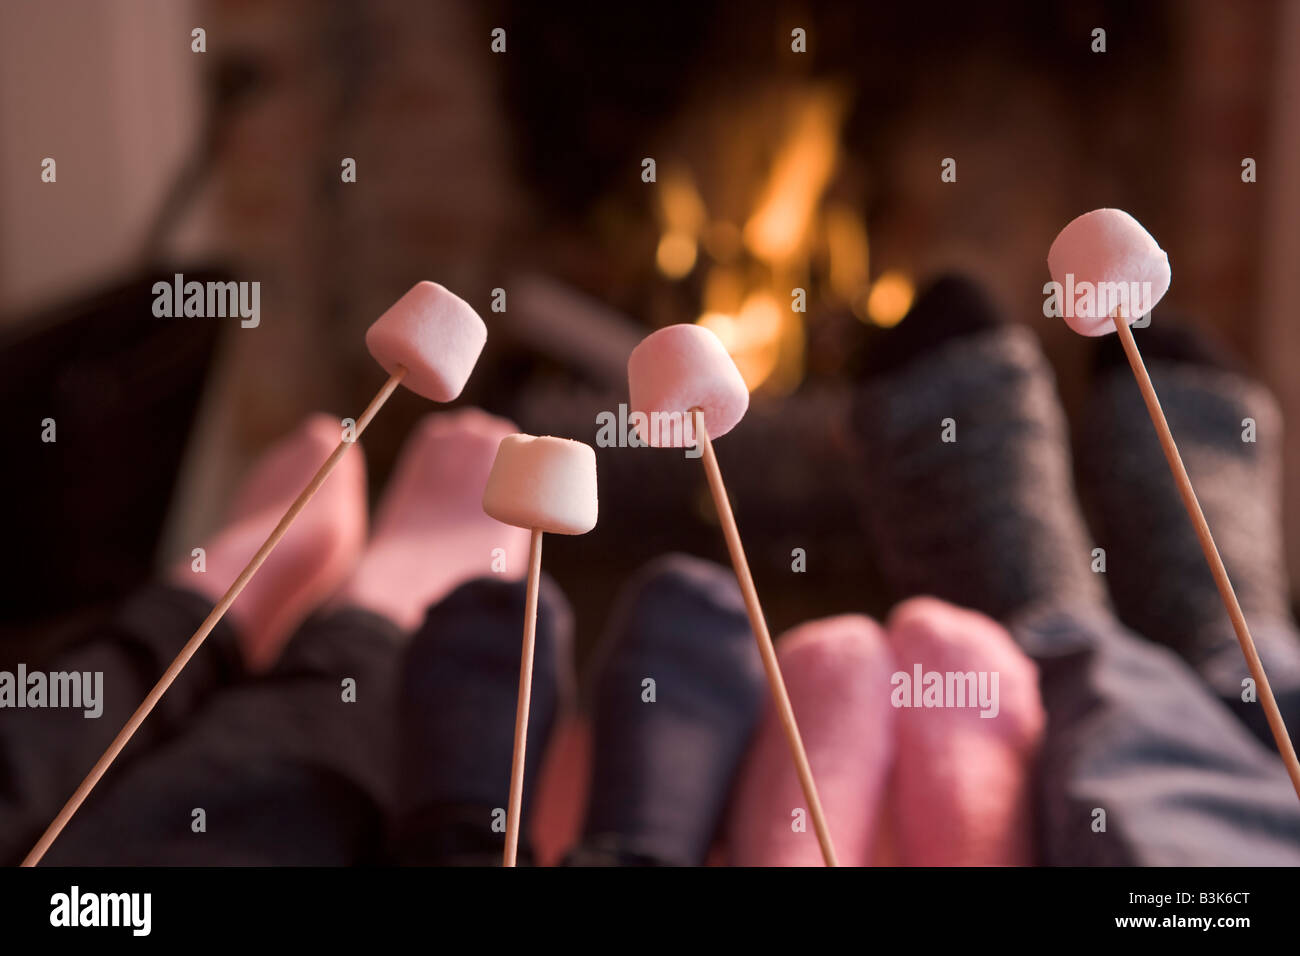 Feet warming at a fireplace with marshmallows on sticks Stock Photo